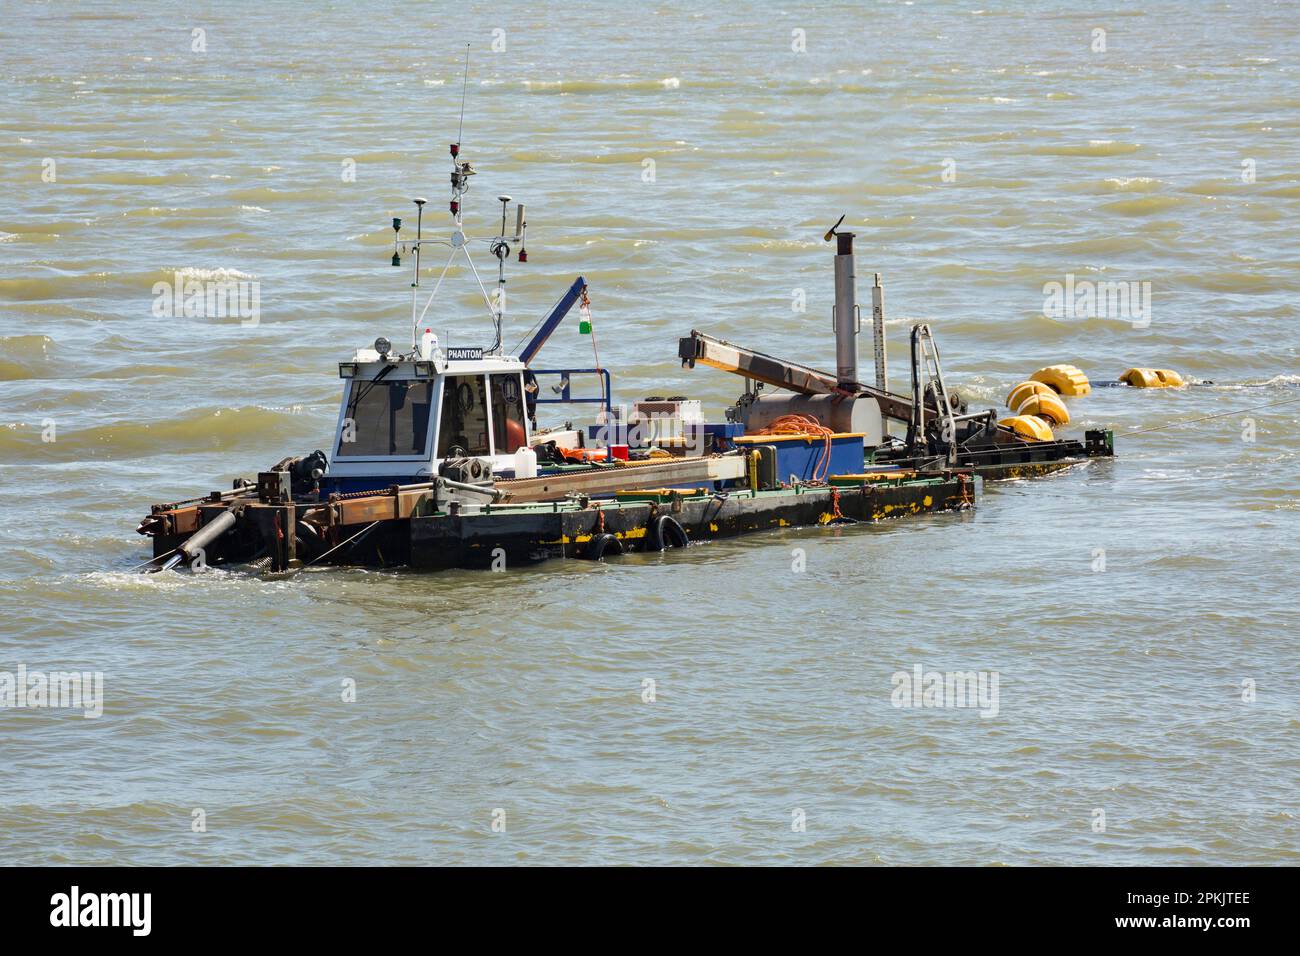 A dredging boat at work in West Bay harbour removing sand and sediment that has accumulated over the winter. West Bay Dorset England UK GB Stock Photo